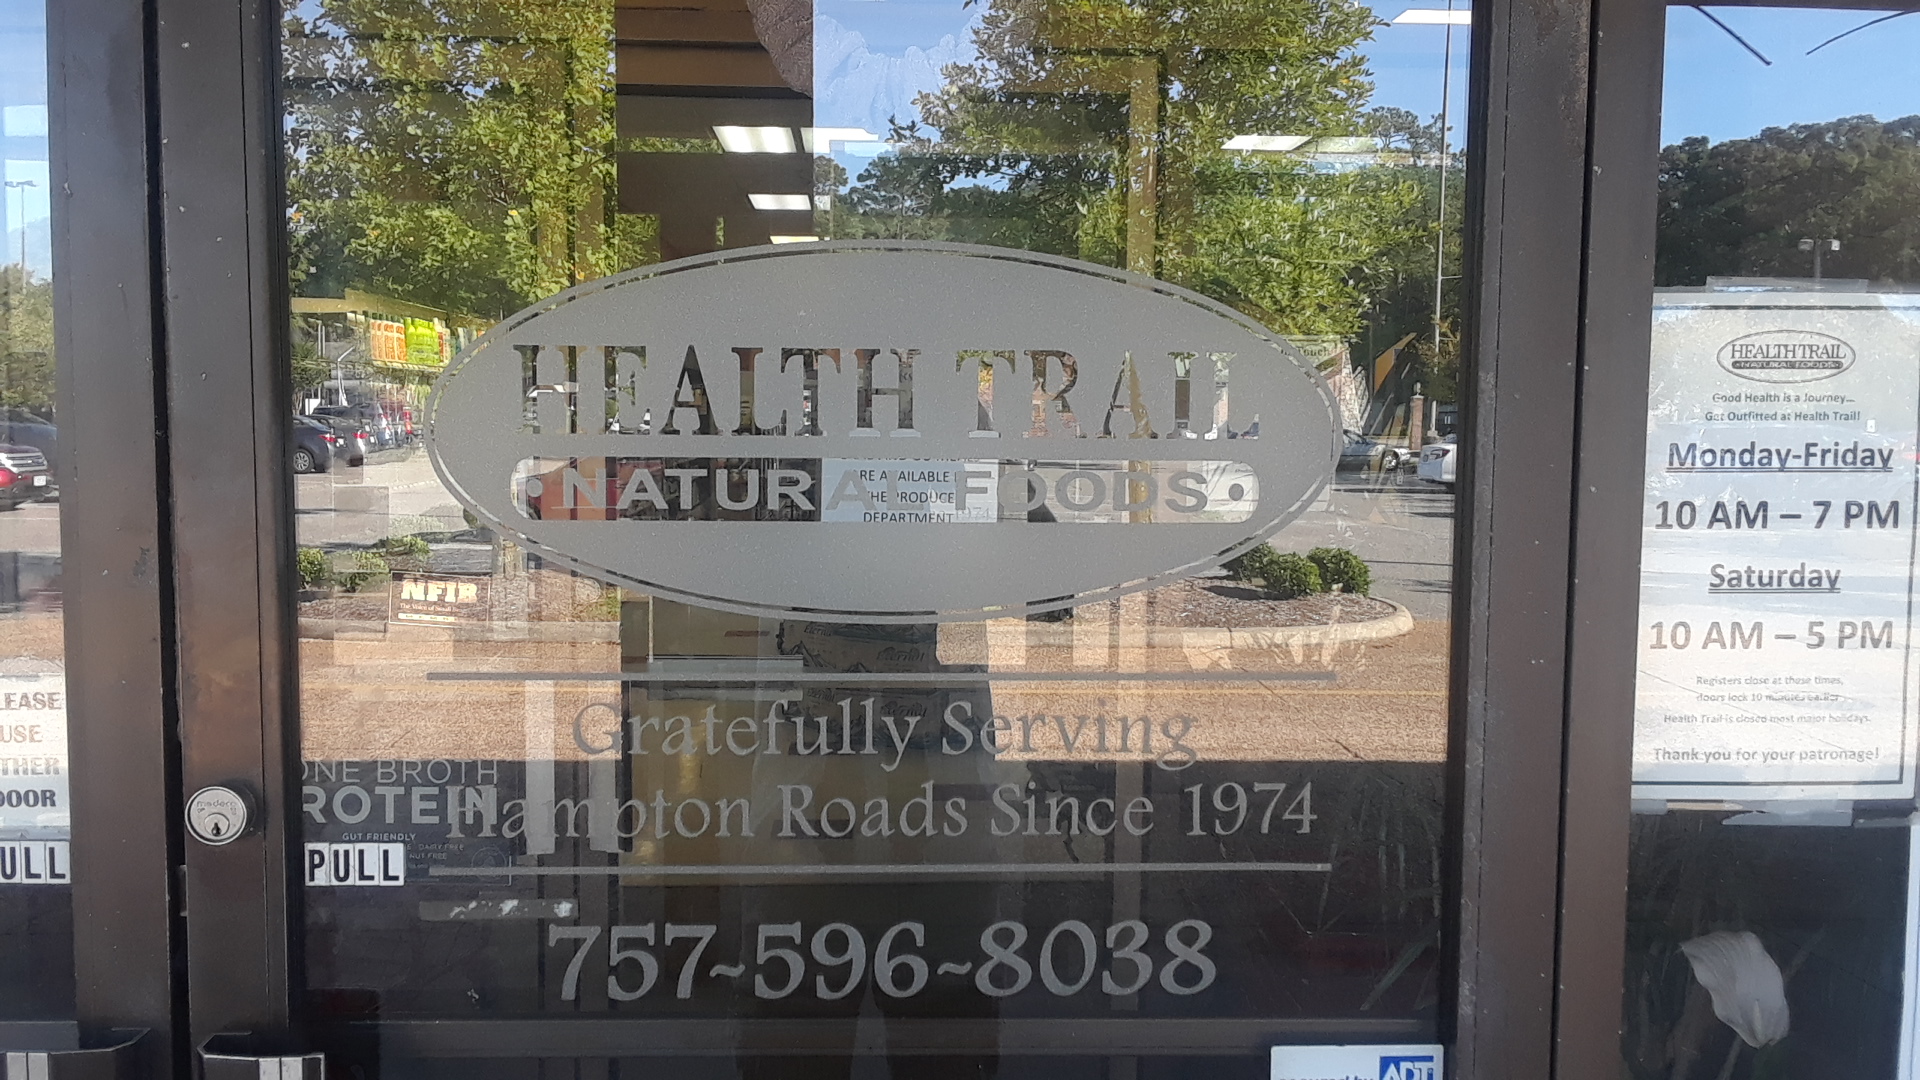 Health Trail Natural Foods